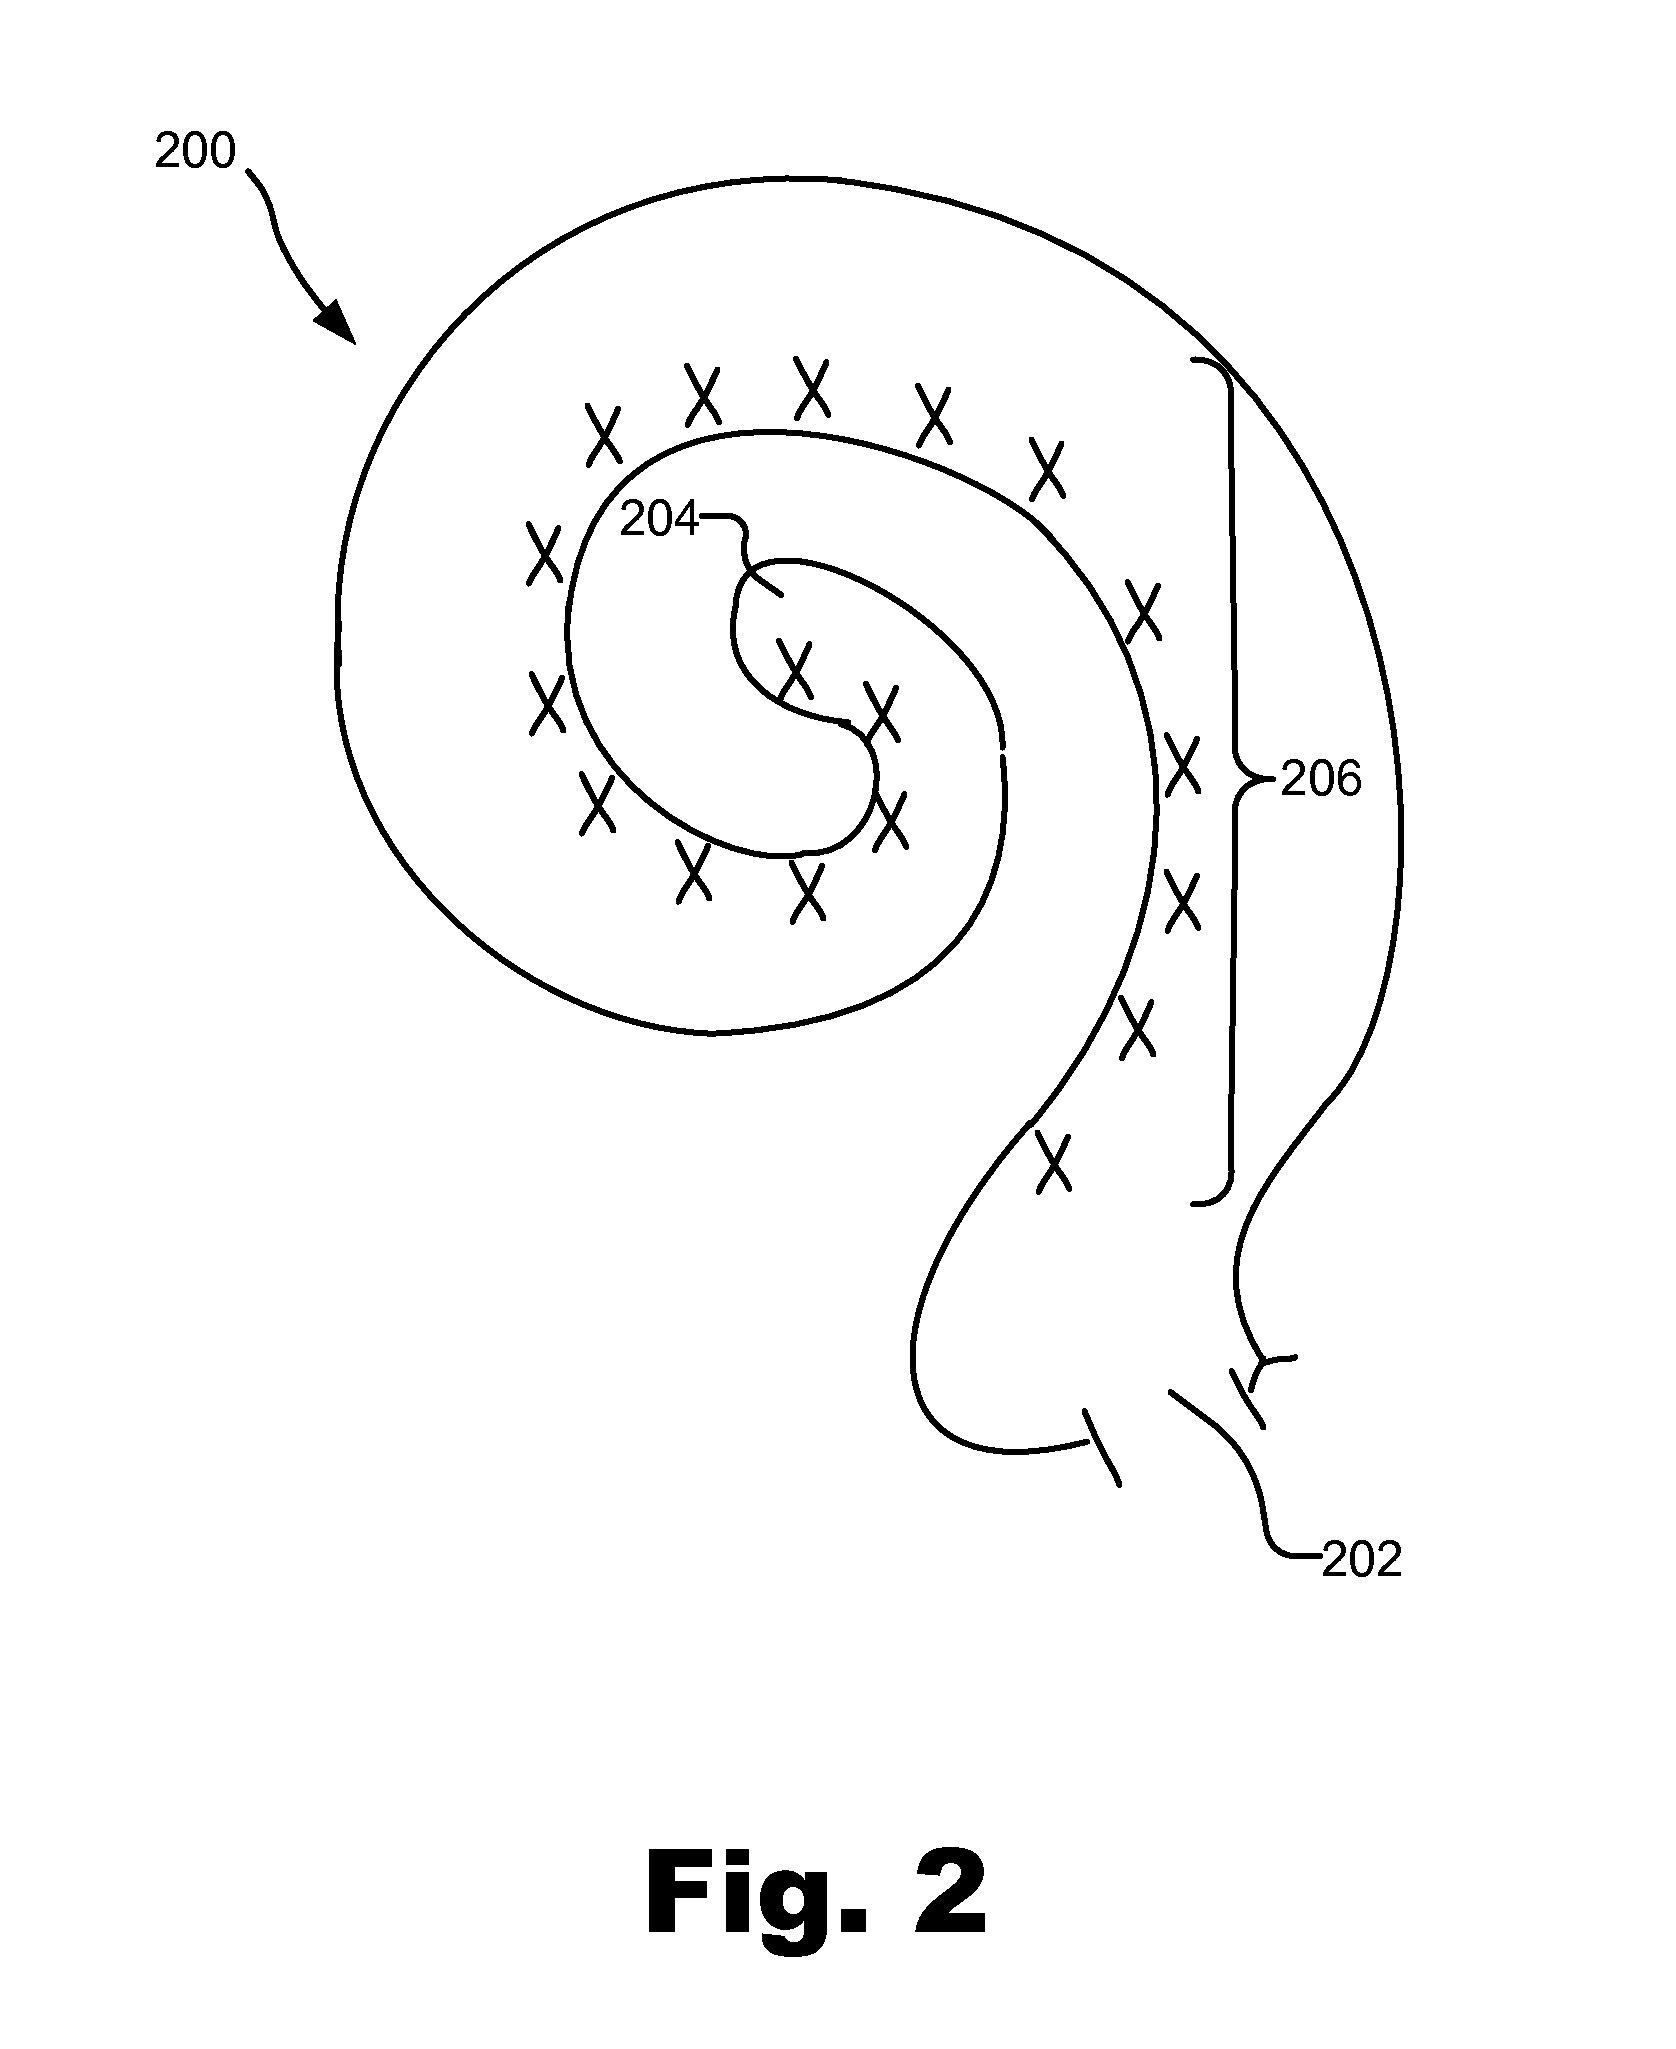 Frequency-dependent focusing systems and methods for use in a cochlear implant system